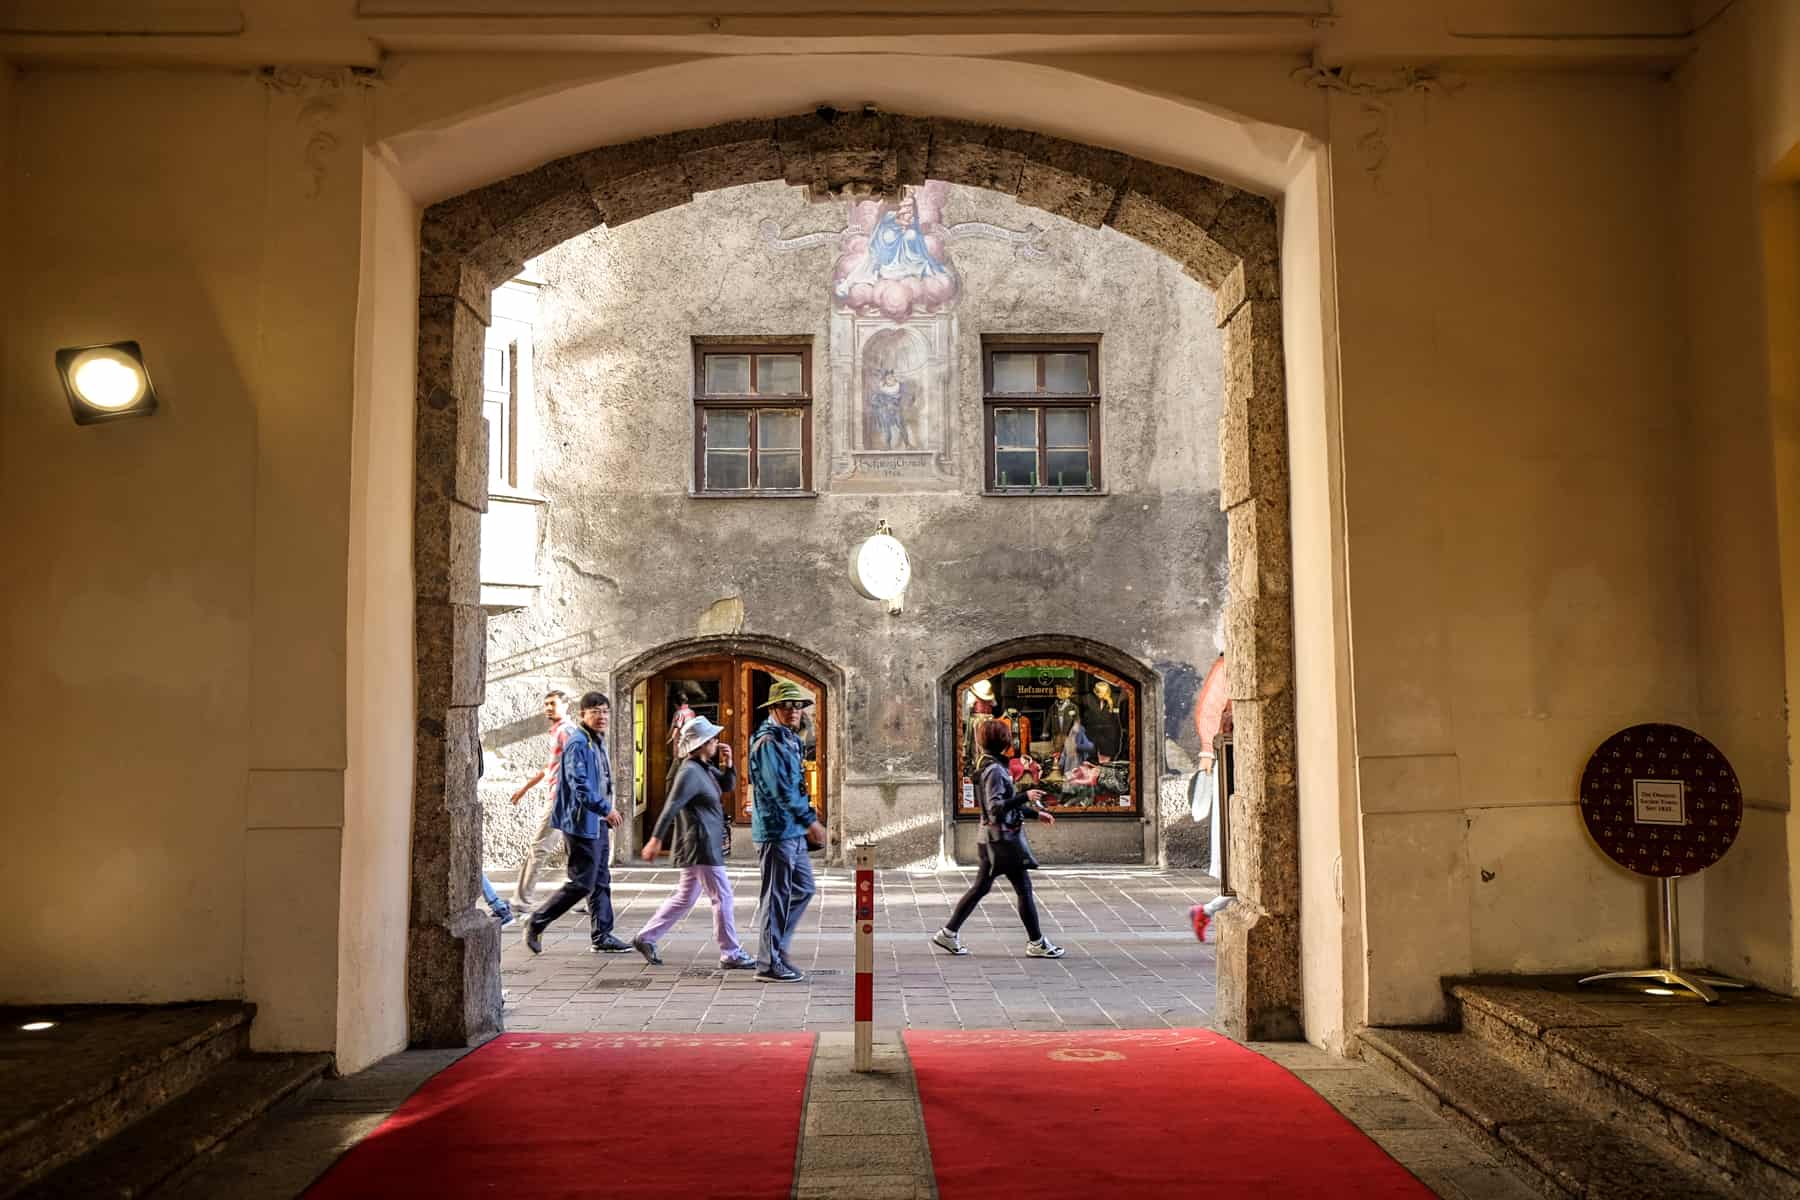 A grand doorway of the Palace in Innsbruck leads to the gothic style buildings on the streets